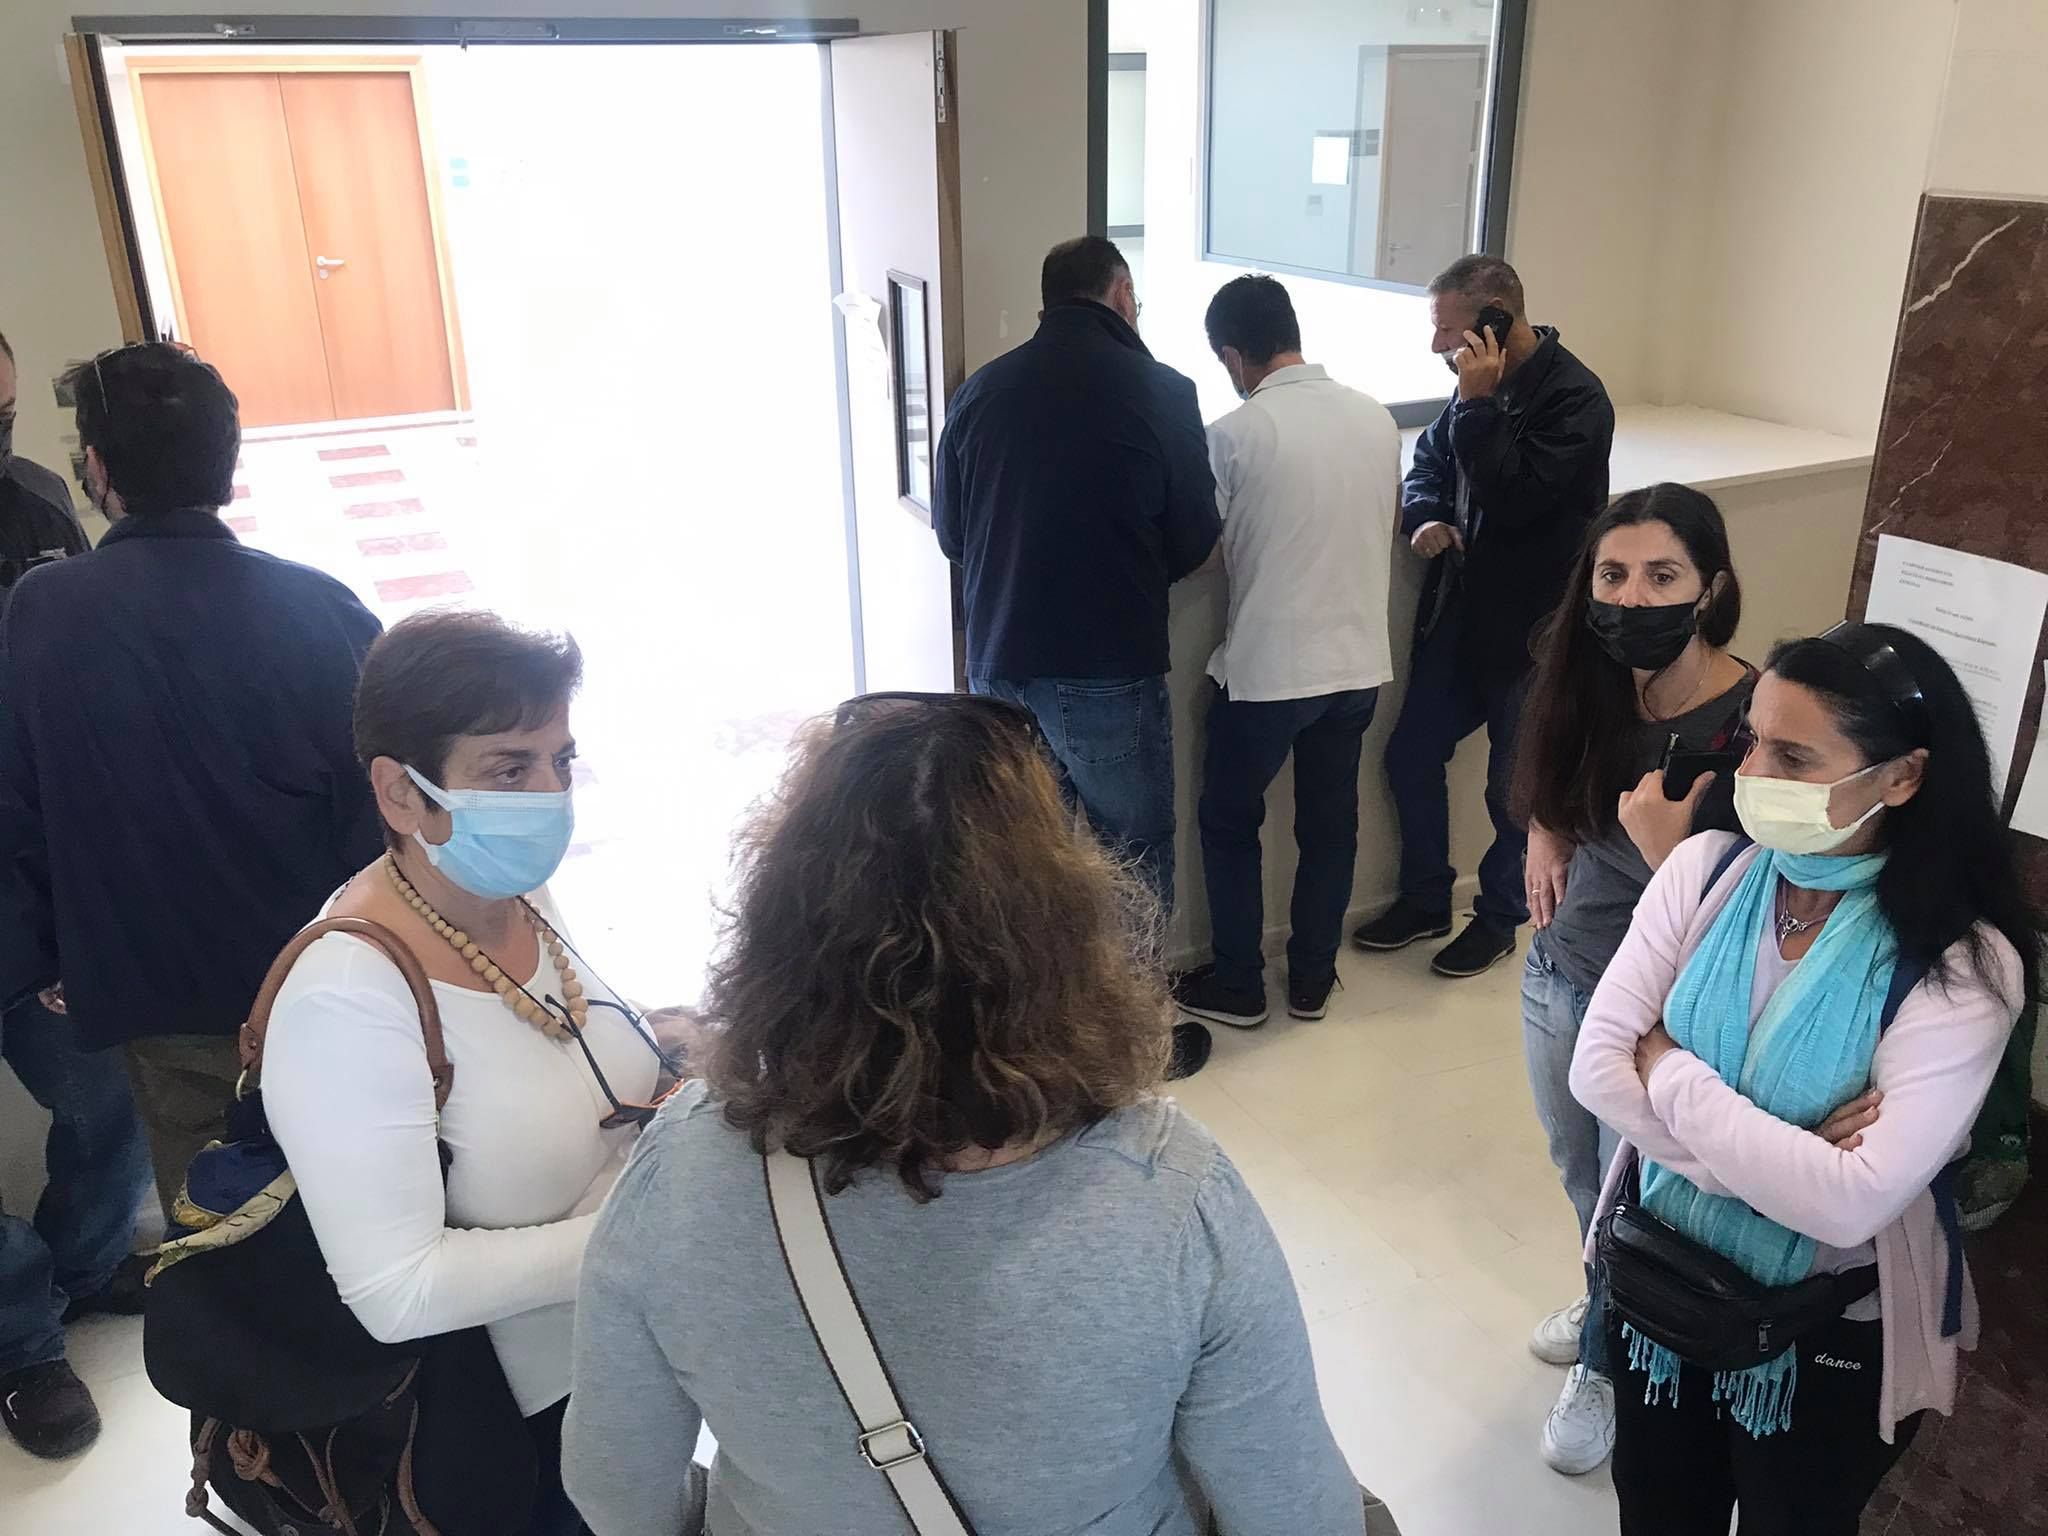 Parents at Prosecutor΄s office regarding lawsuit they filed for Vocational High School vandalism